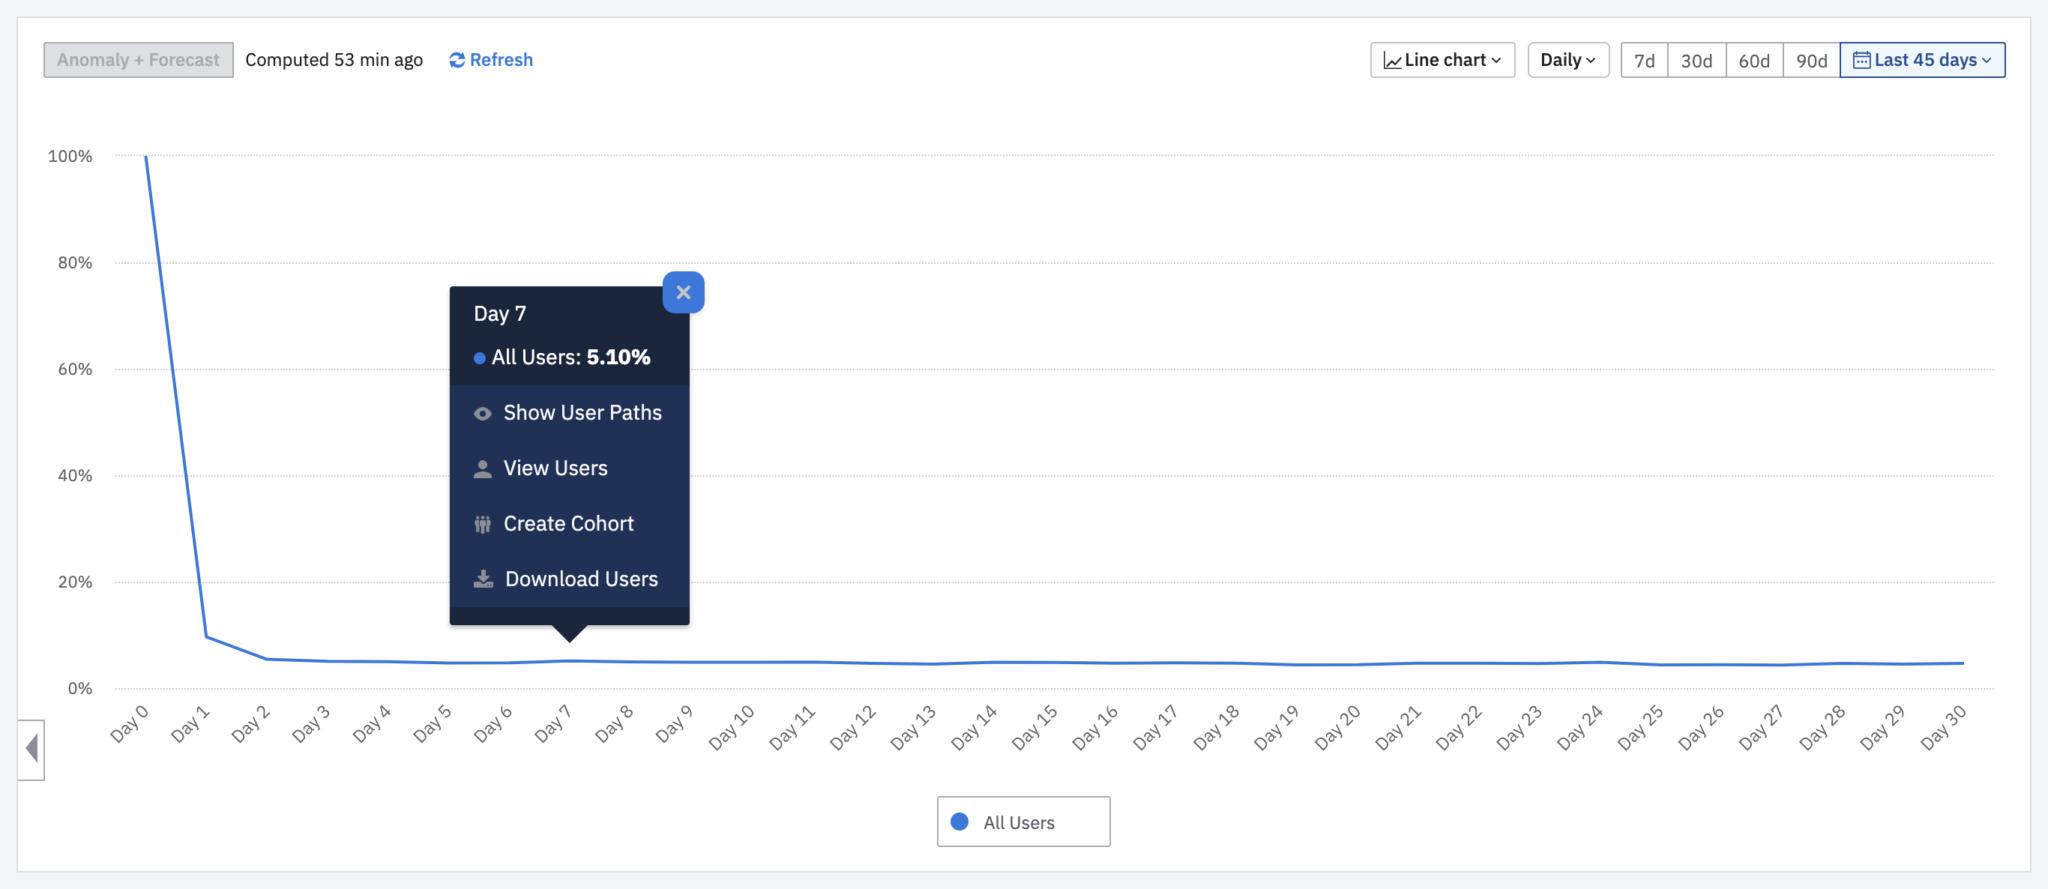 Calculate Customer Churn Rate: Day 7 Retention